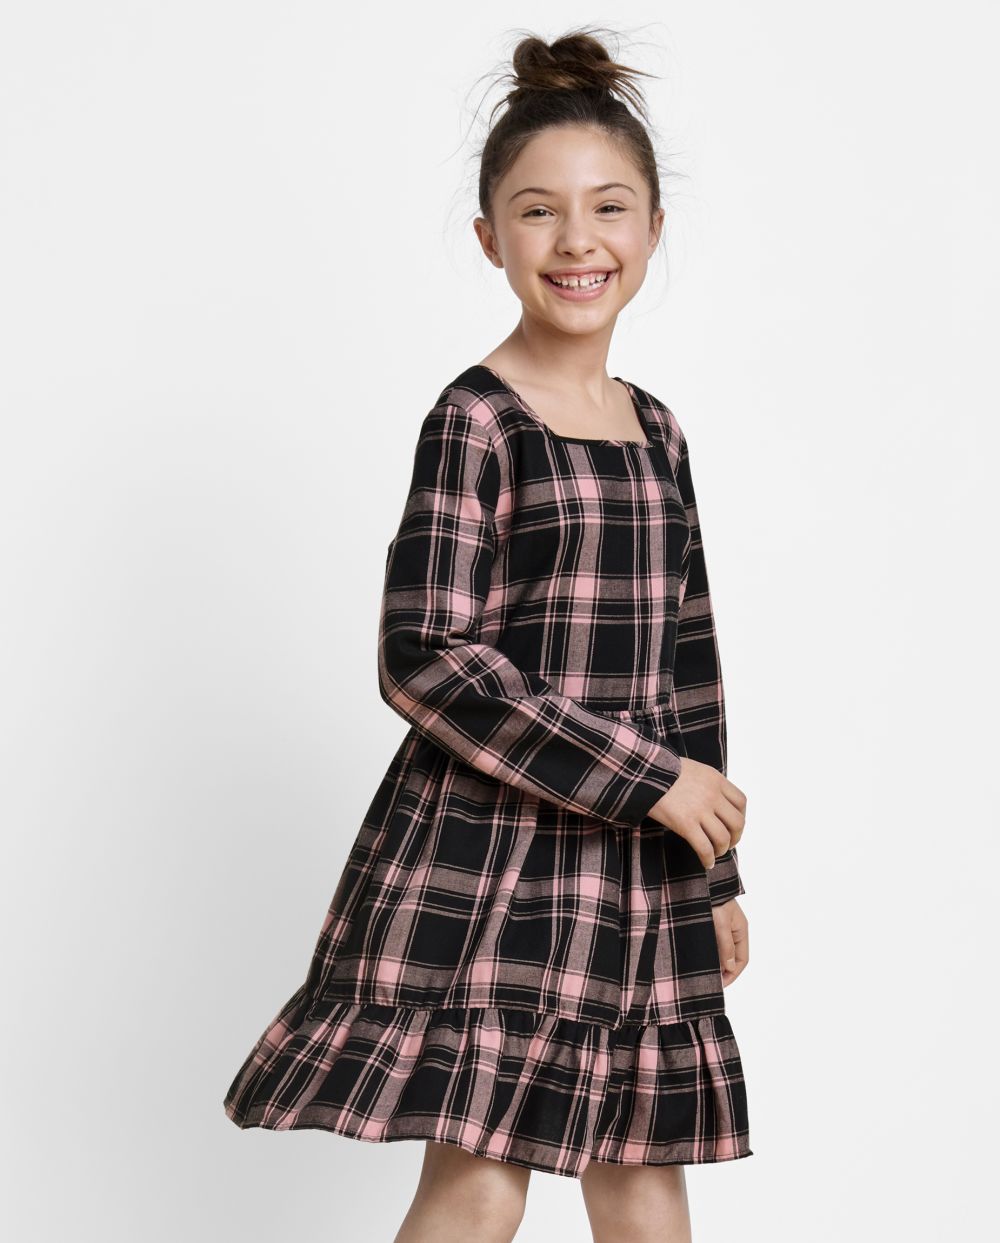 Girls Long Sleeves Square Neck Tiered Above the Knee Plaid Print Dress